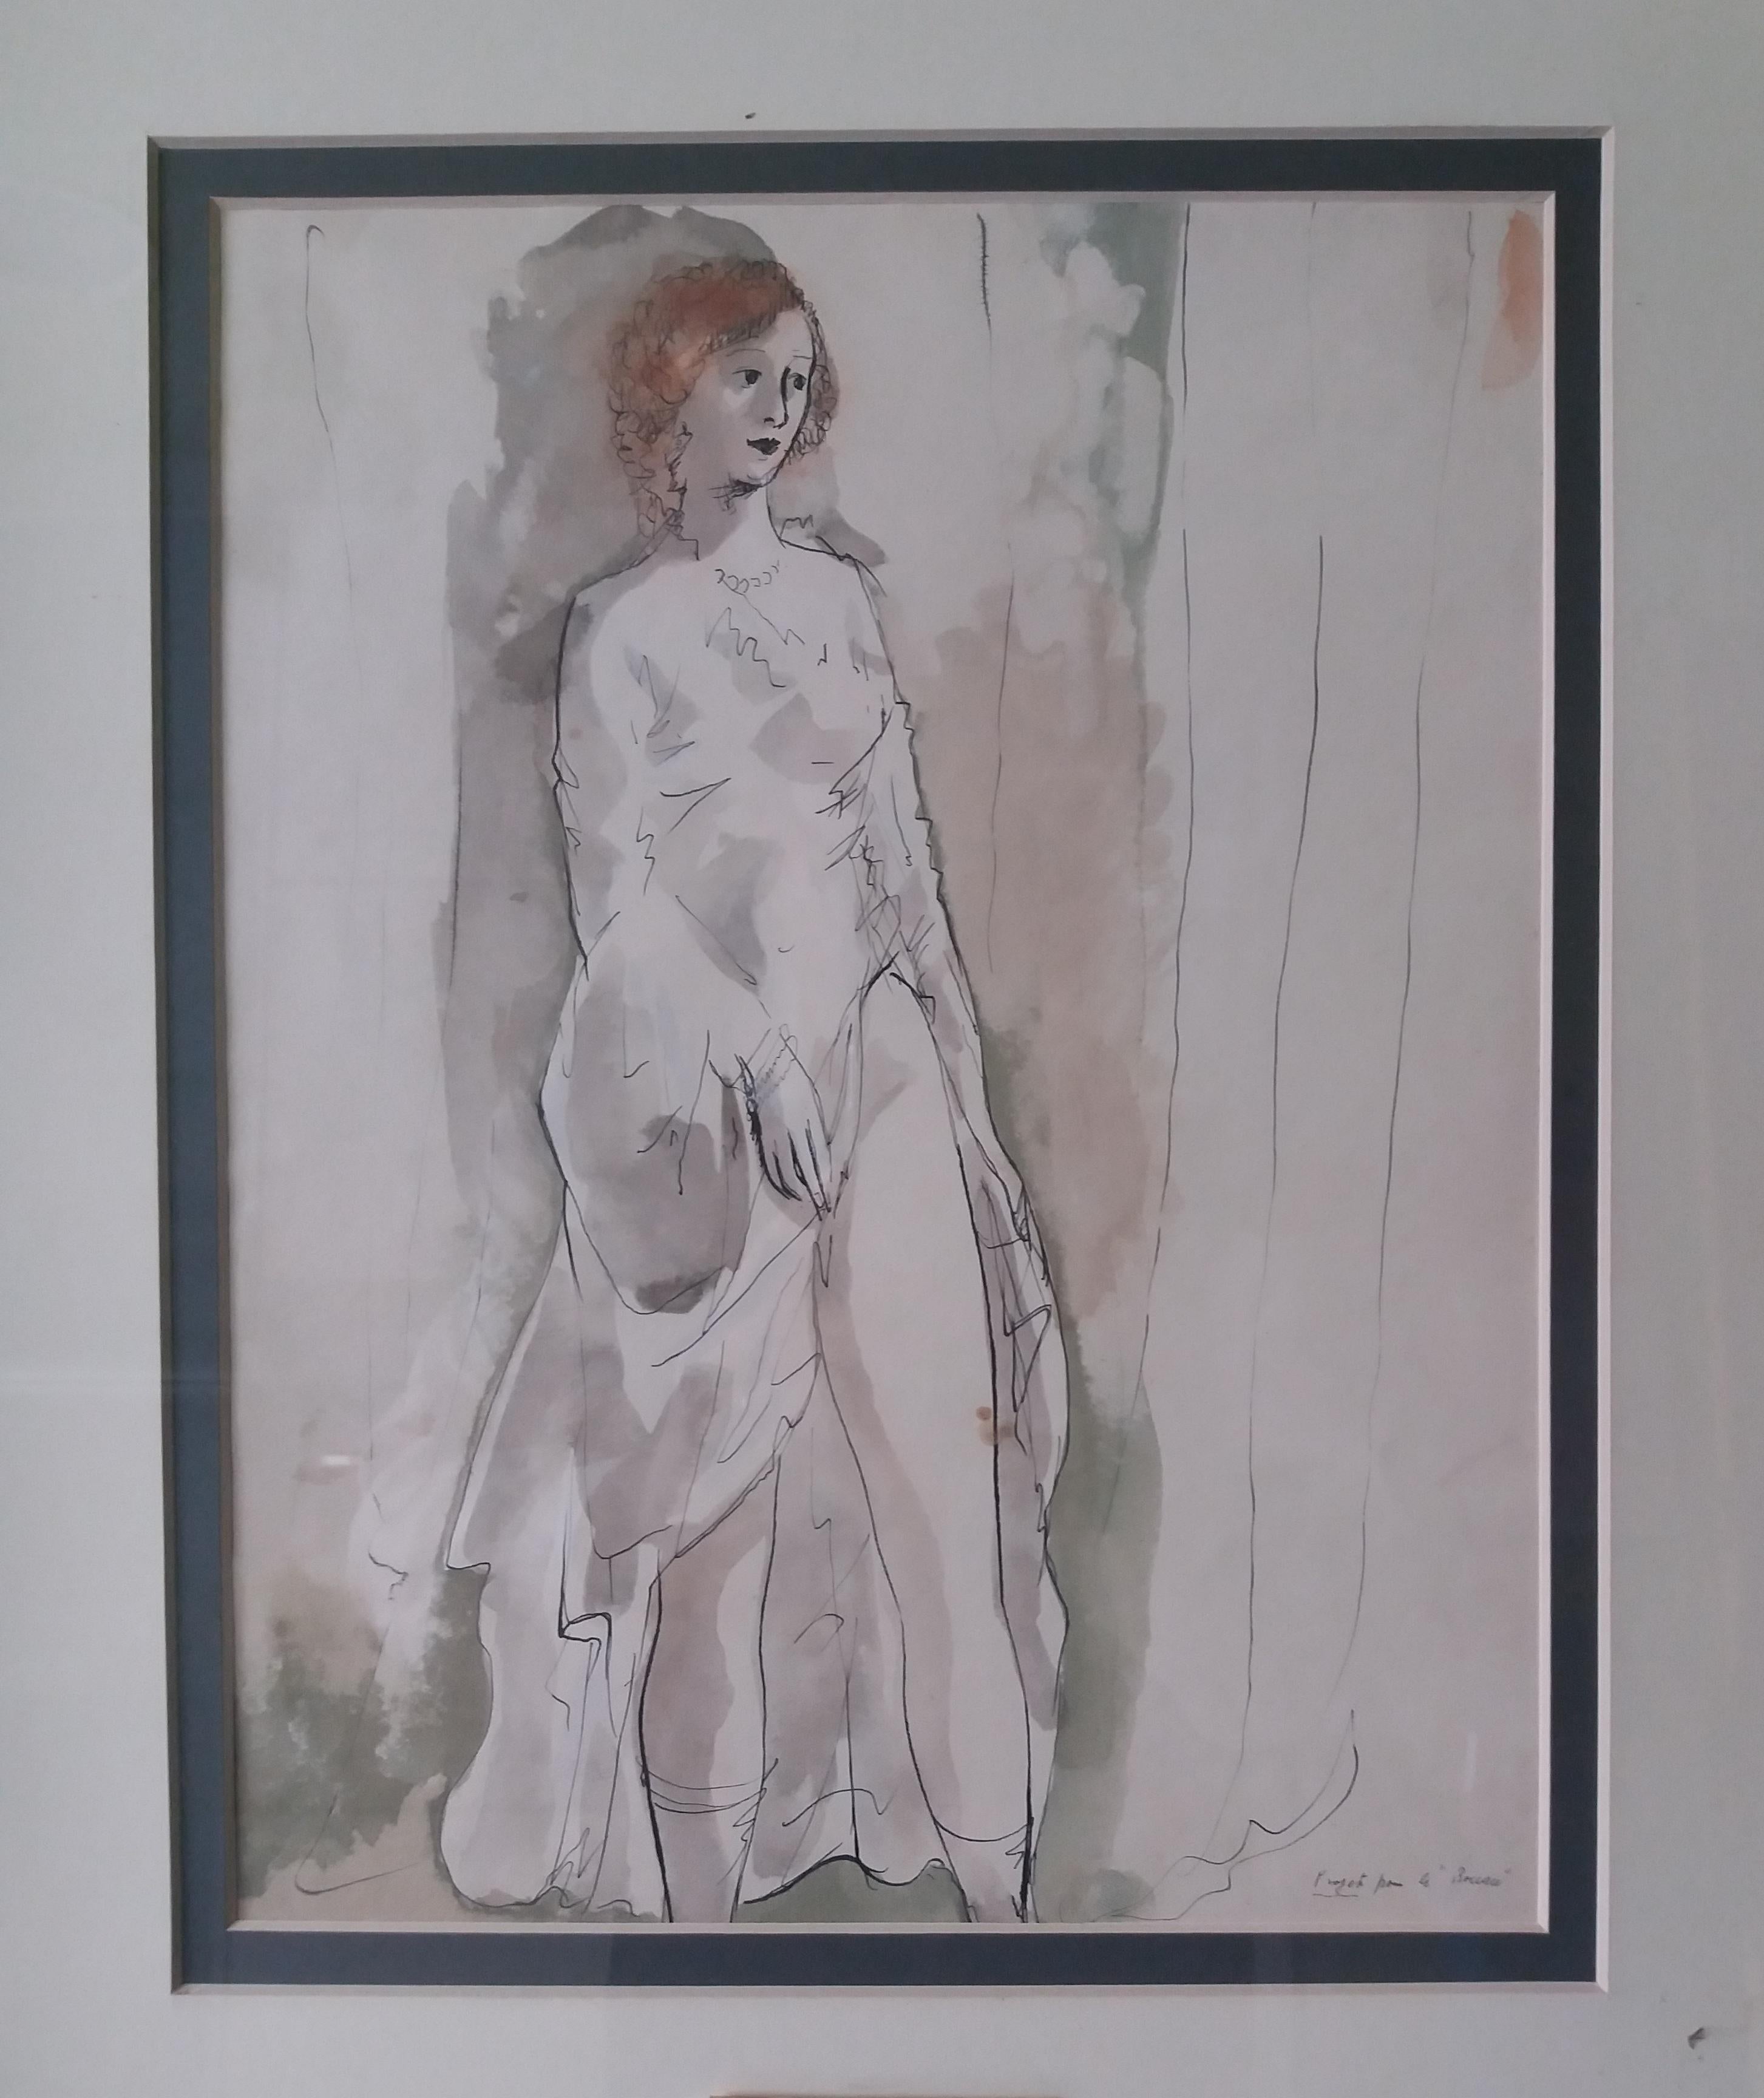  Pruna  Women Sketch for Bocaccio original watercolor painting - Expressionist Painting by Pere Pruna y Ocerans